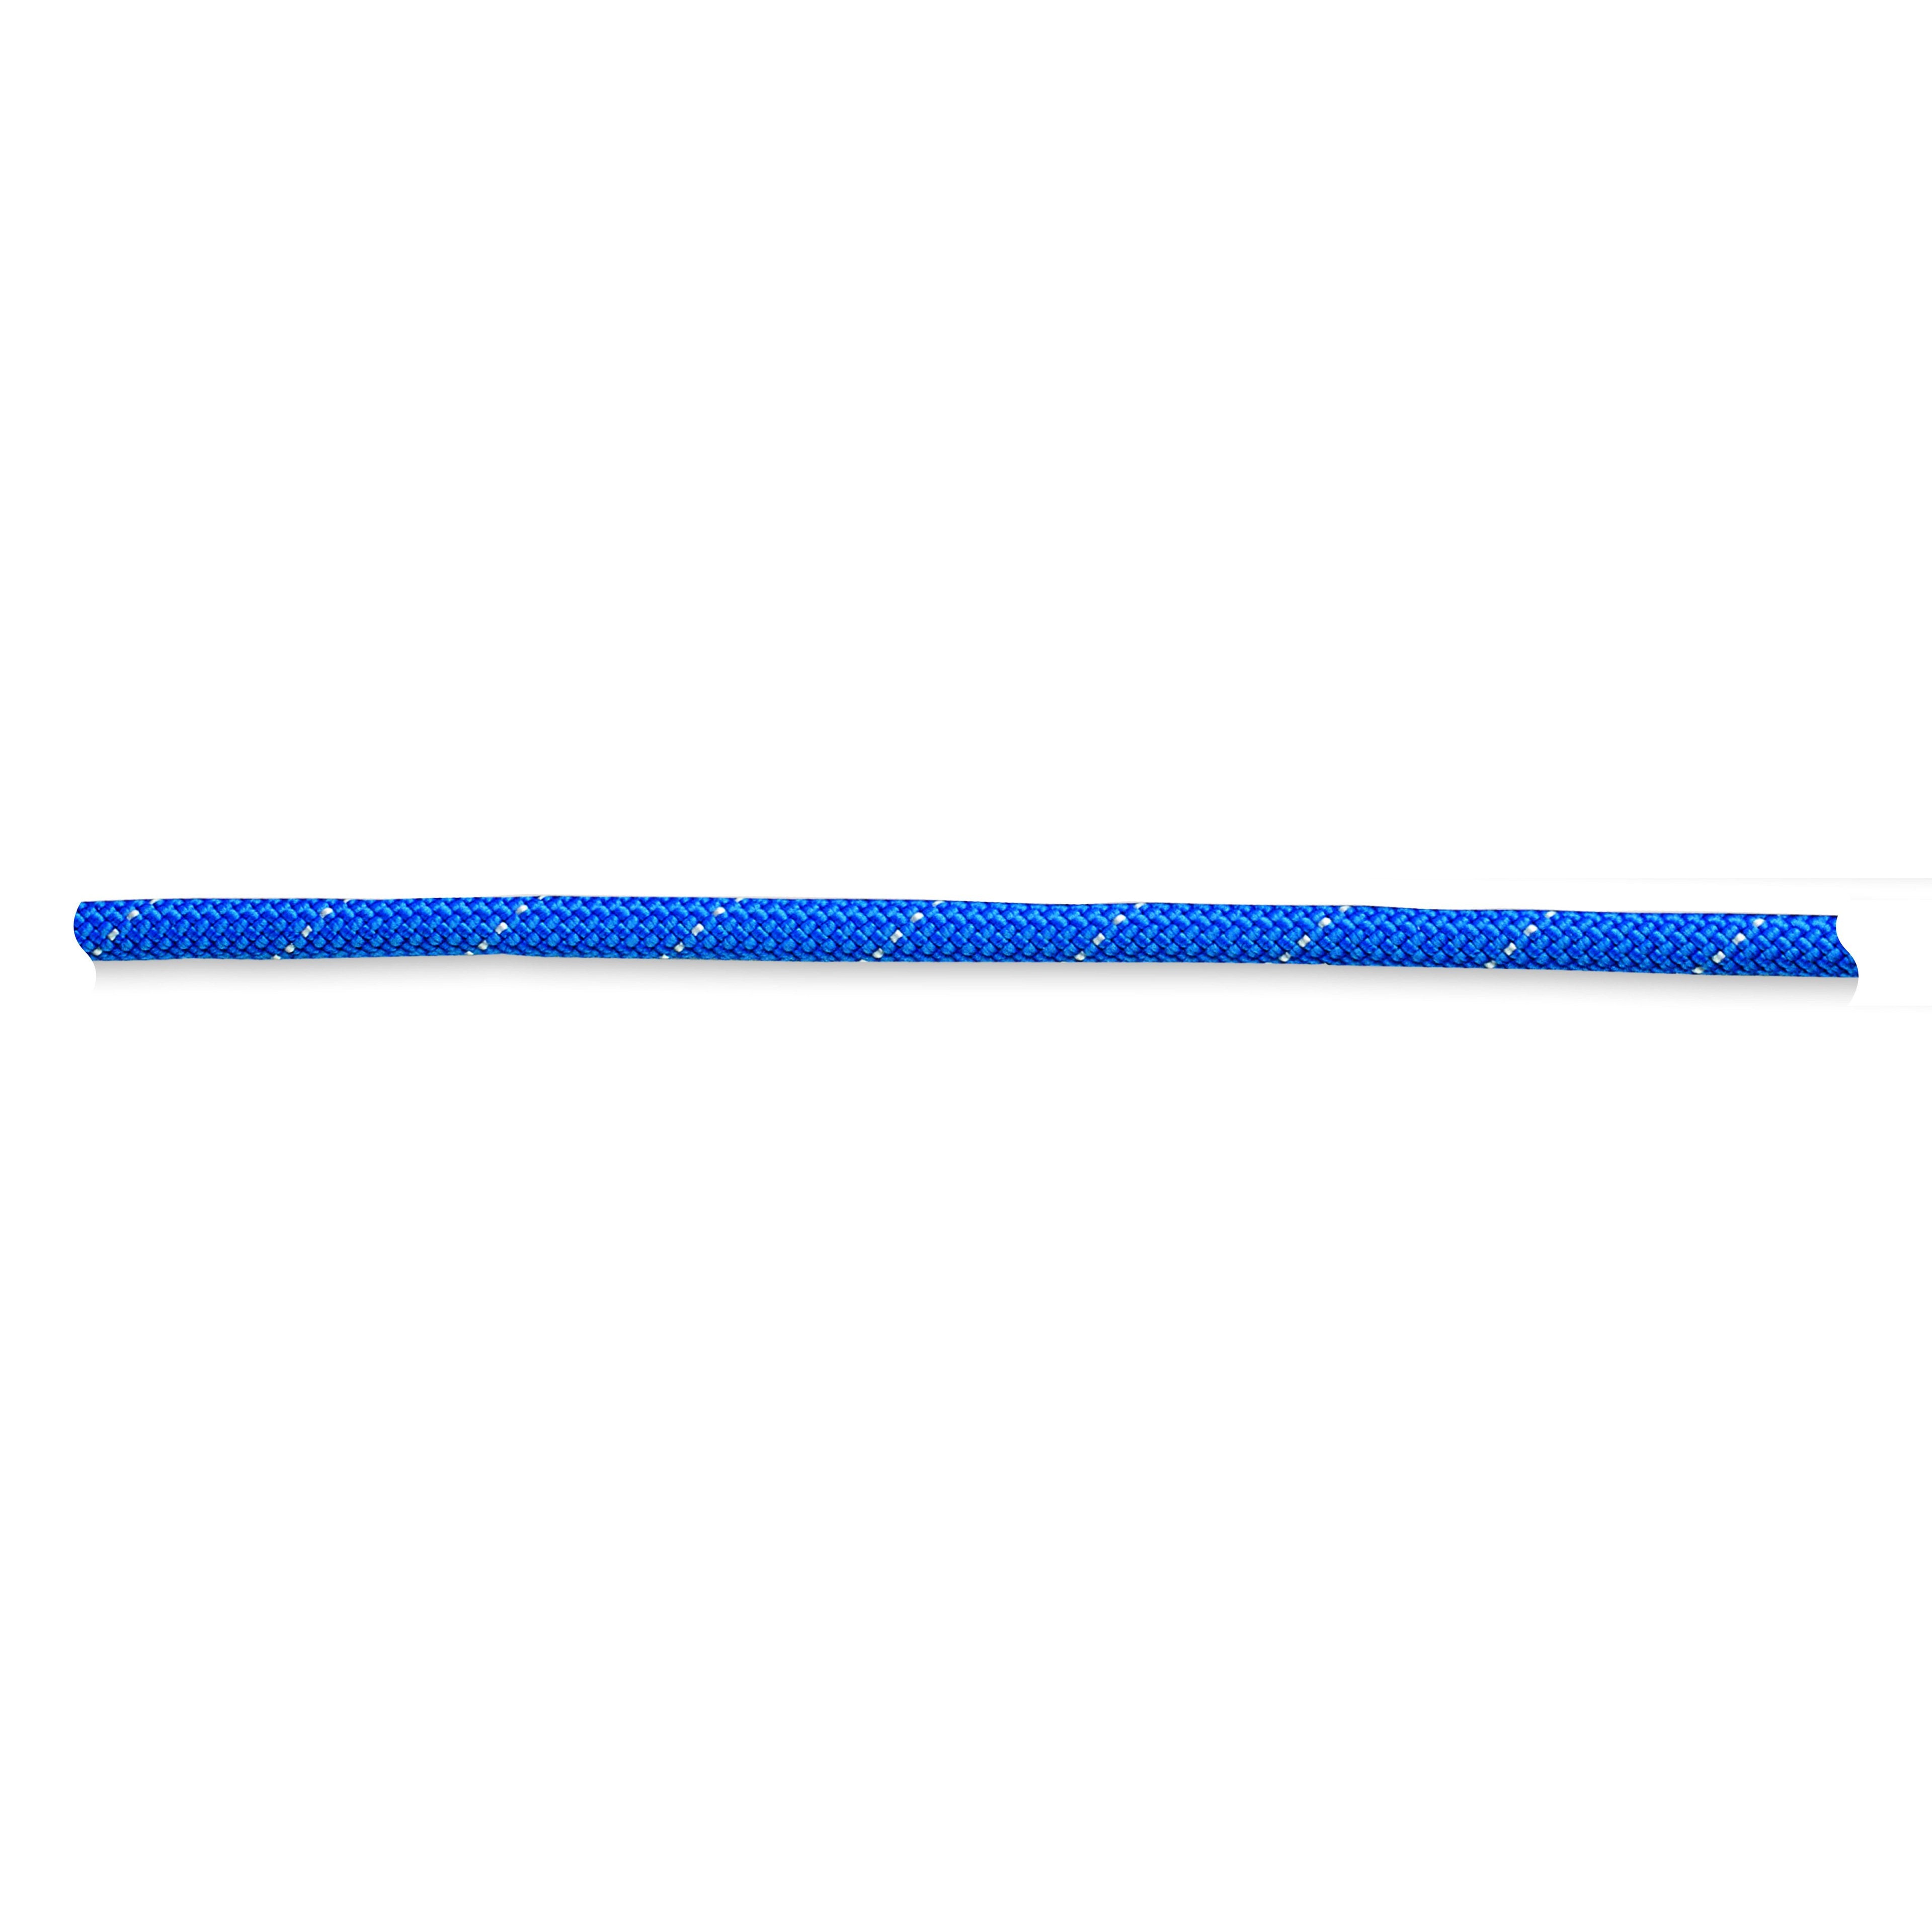 New England KM-III Rescue Rope